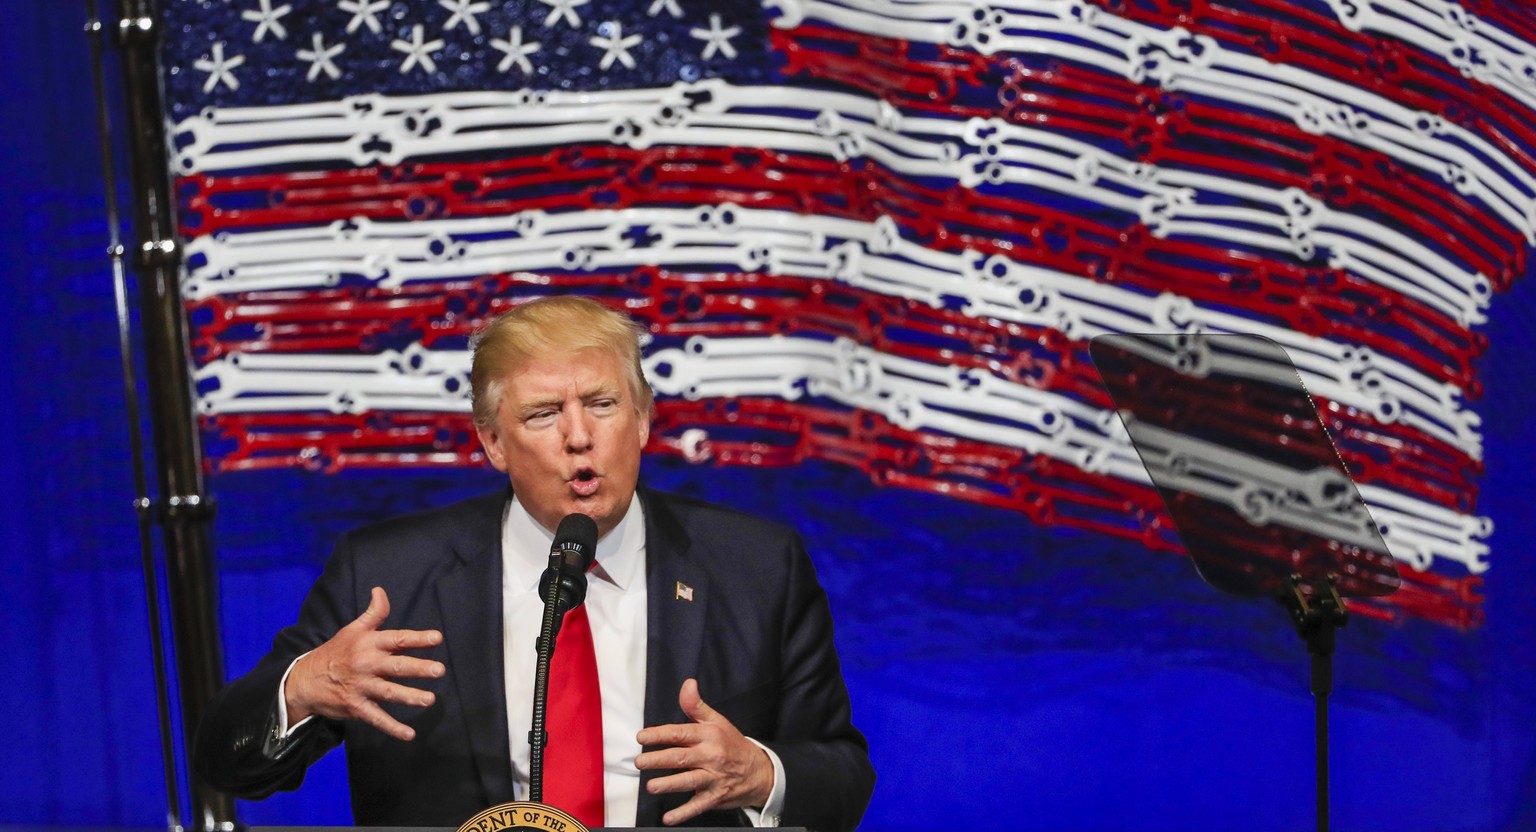 epa05914048 US President Donald J. Trump gestures a he speaks in front of an American flag made of tools at the Snap-on Tools headquarters in Kenosha, Wisconsin, USA, 18 April 2017. Trump spoke on his ...